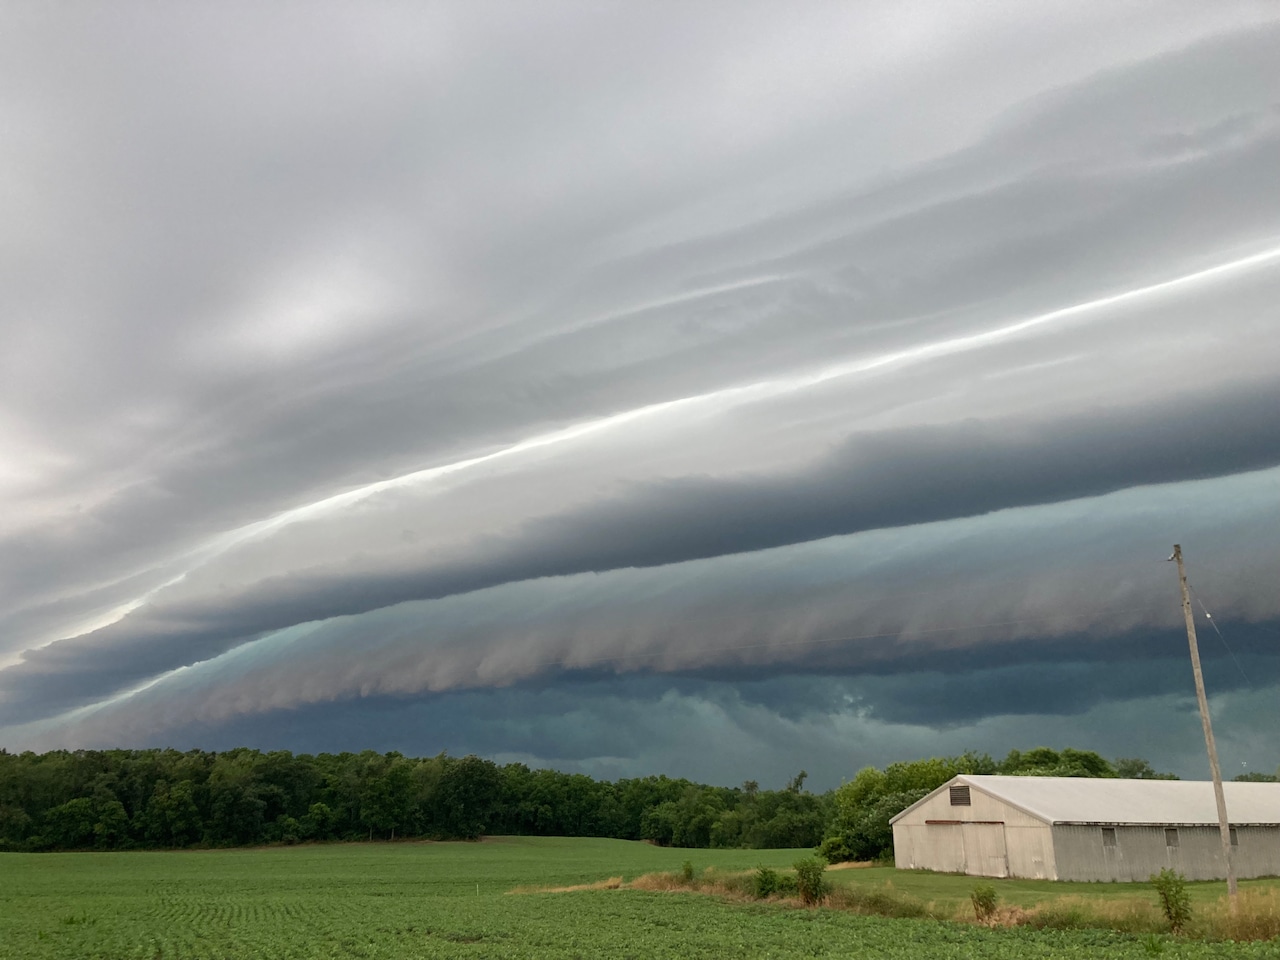 What caused these ominous shelf clouds to stretch across Michigan skies [Video]